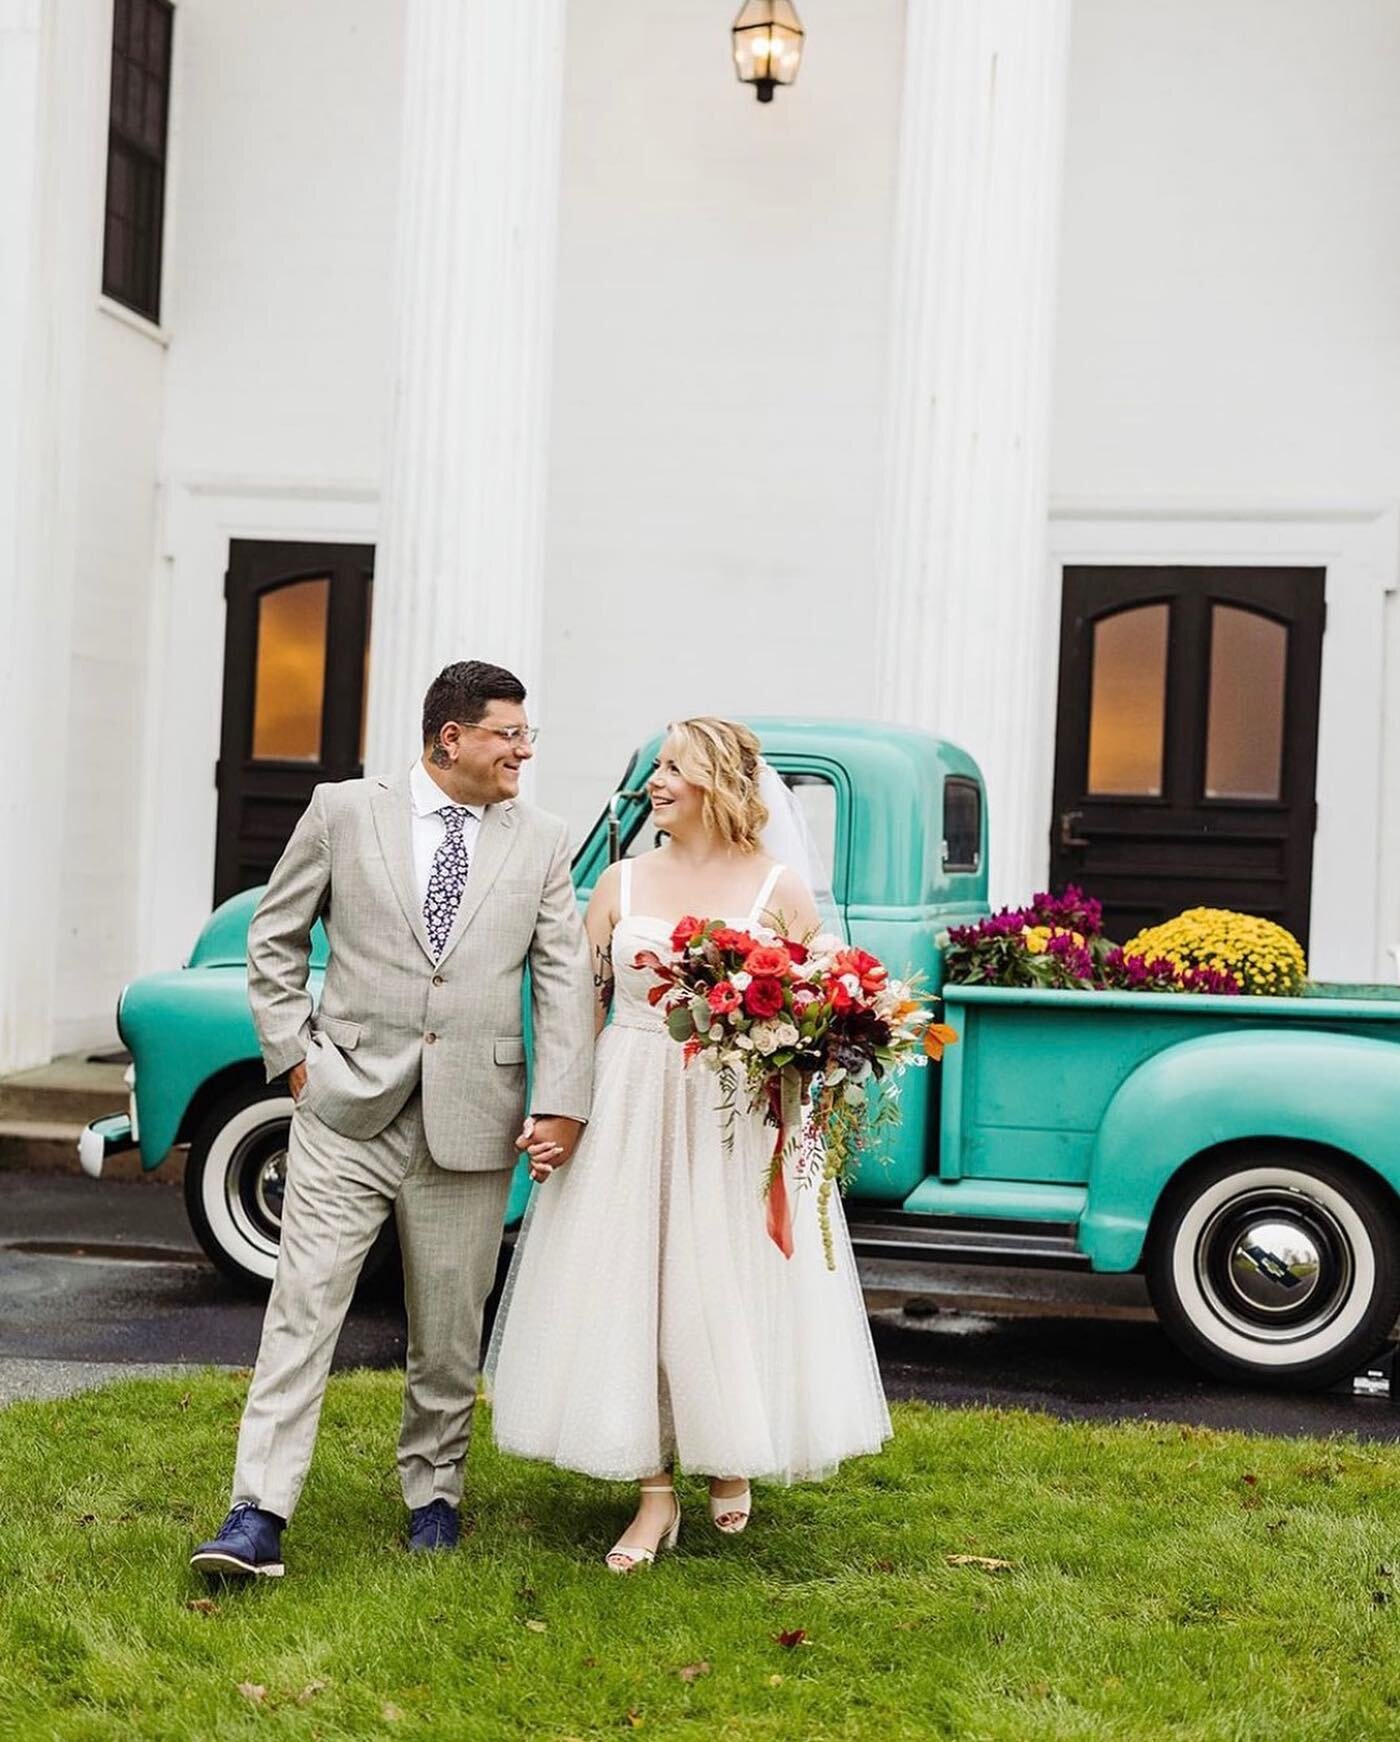 Clean lines and North Shore vibes!

Beautiful bride Skylar had a vision with her adorably tailored tea length dress, breathtaking florals, and the cutest borrowed blue vintage truck. 

For makeup she wanted to look like herself along with being eleva